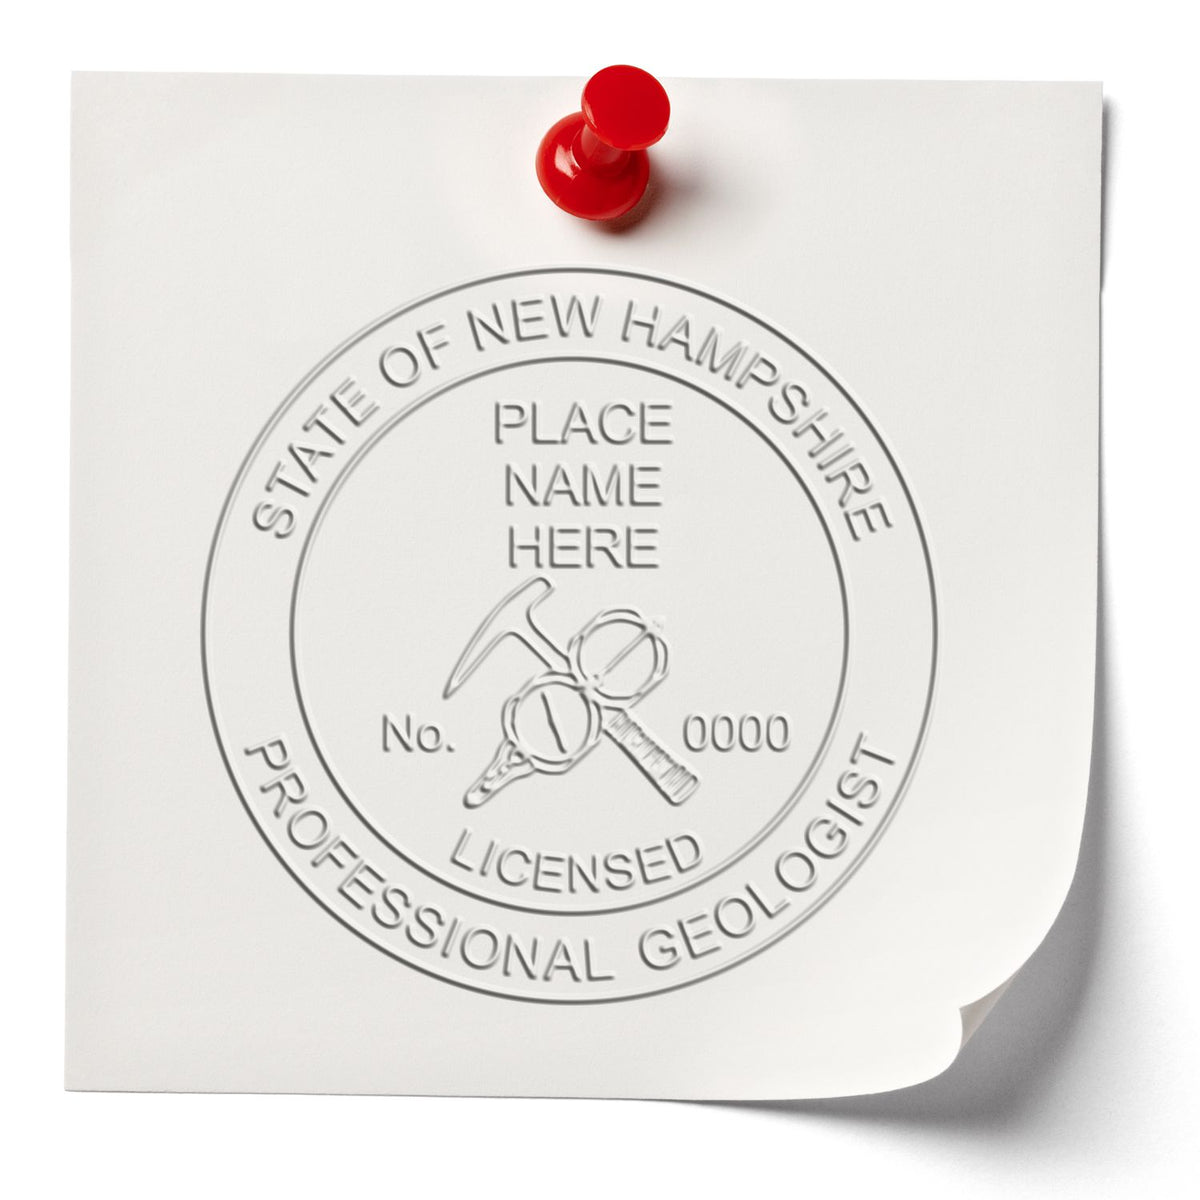 An in use photo of the Long Reach New Hampshire Geology Seal showing a sample imprint on a cardstock